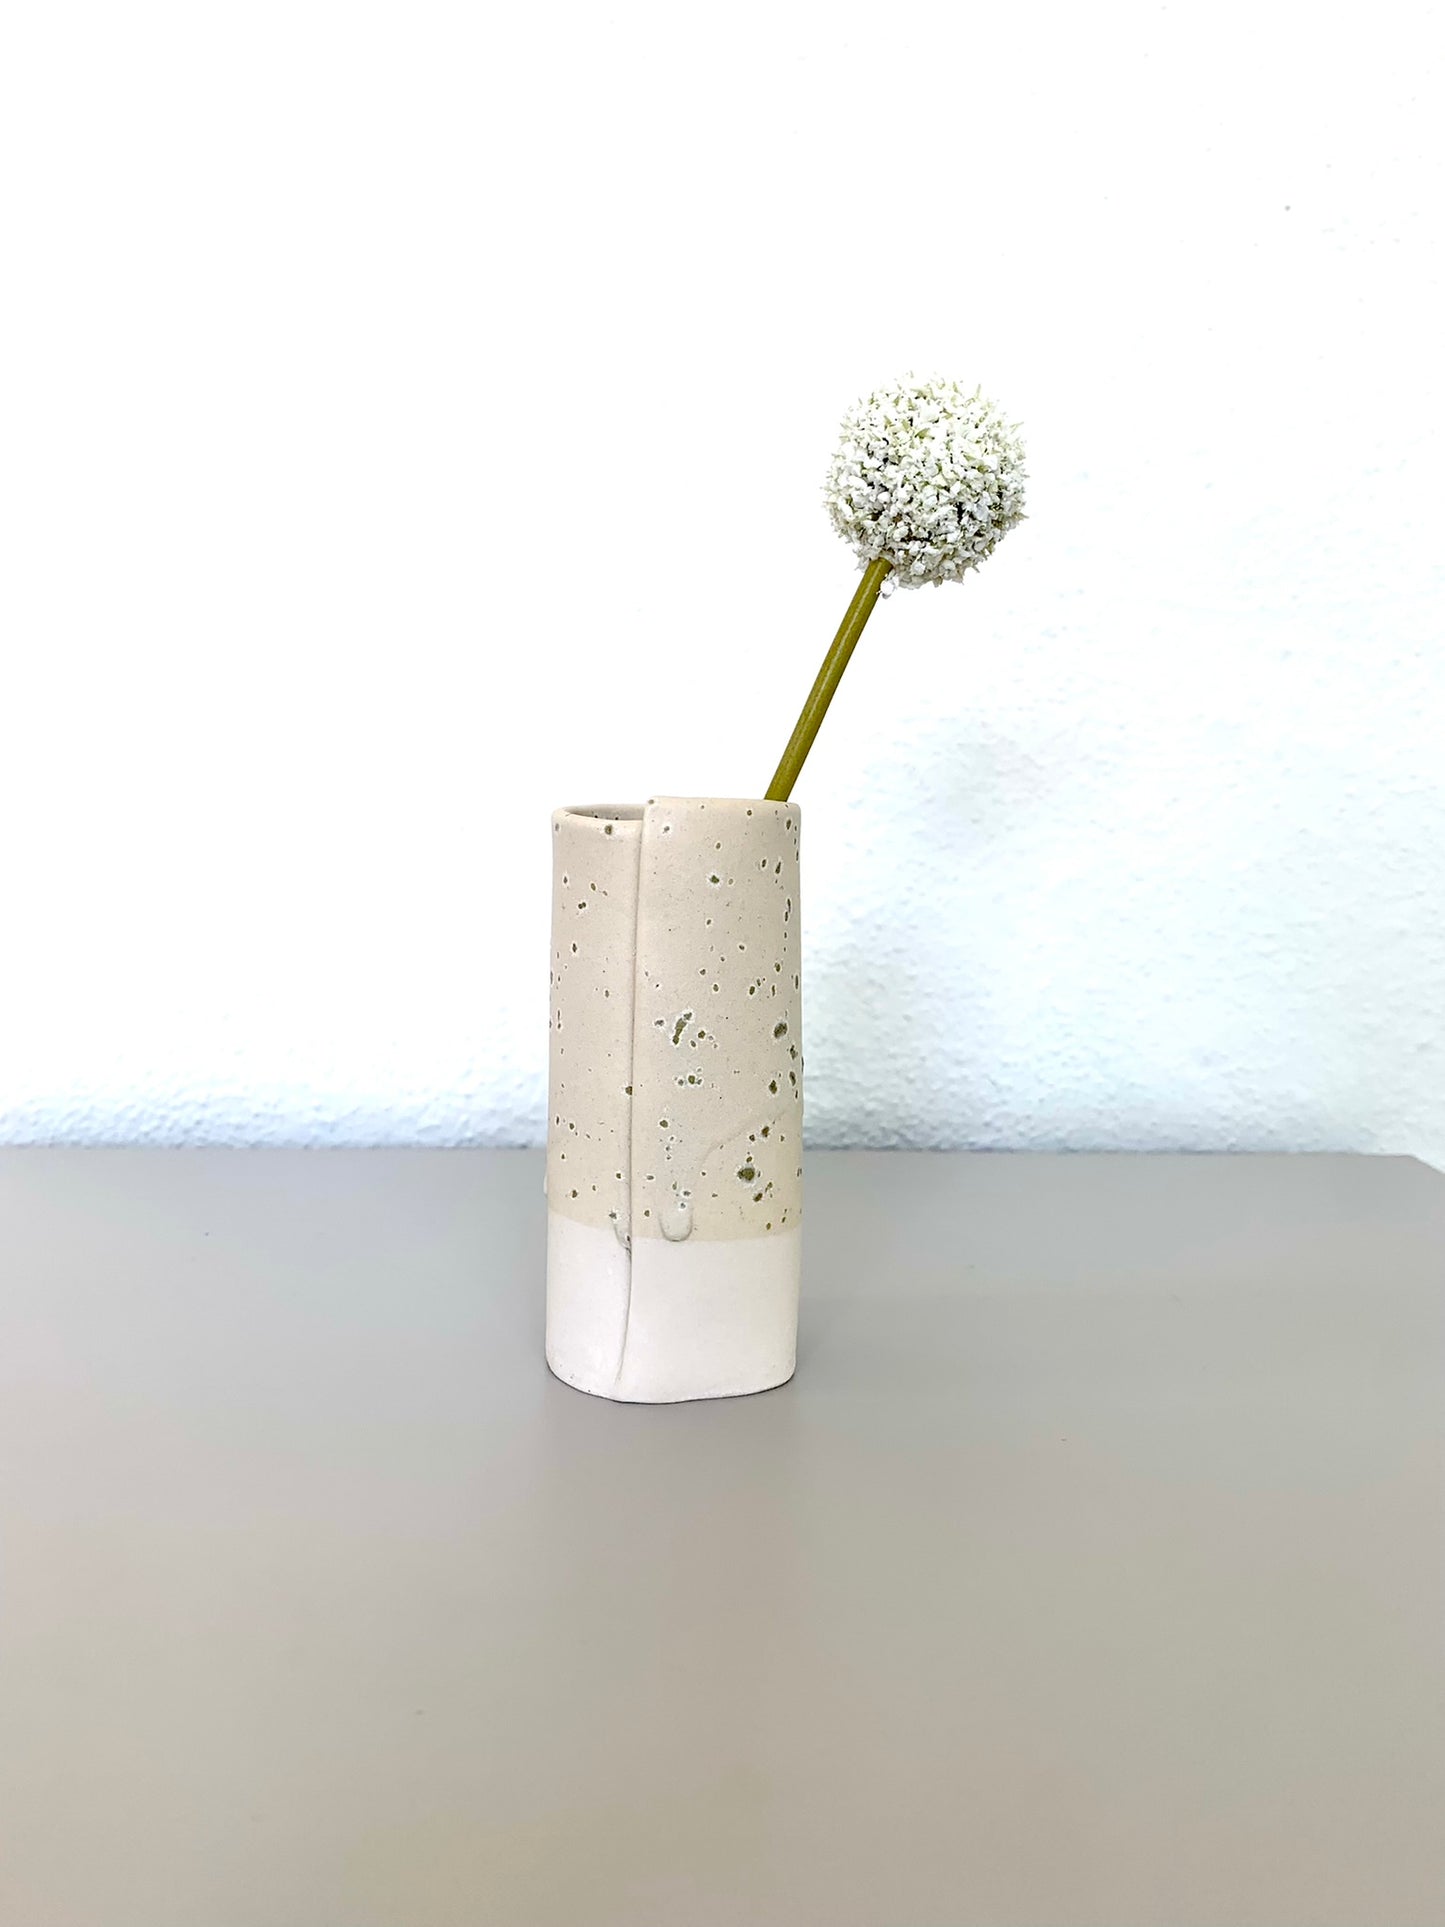 wrapped bud vase - speckled sea glass